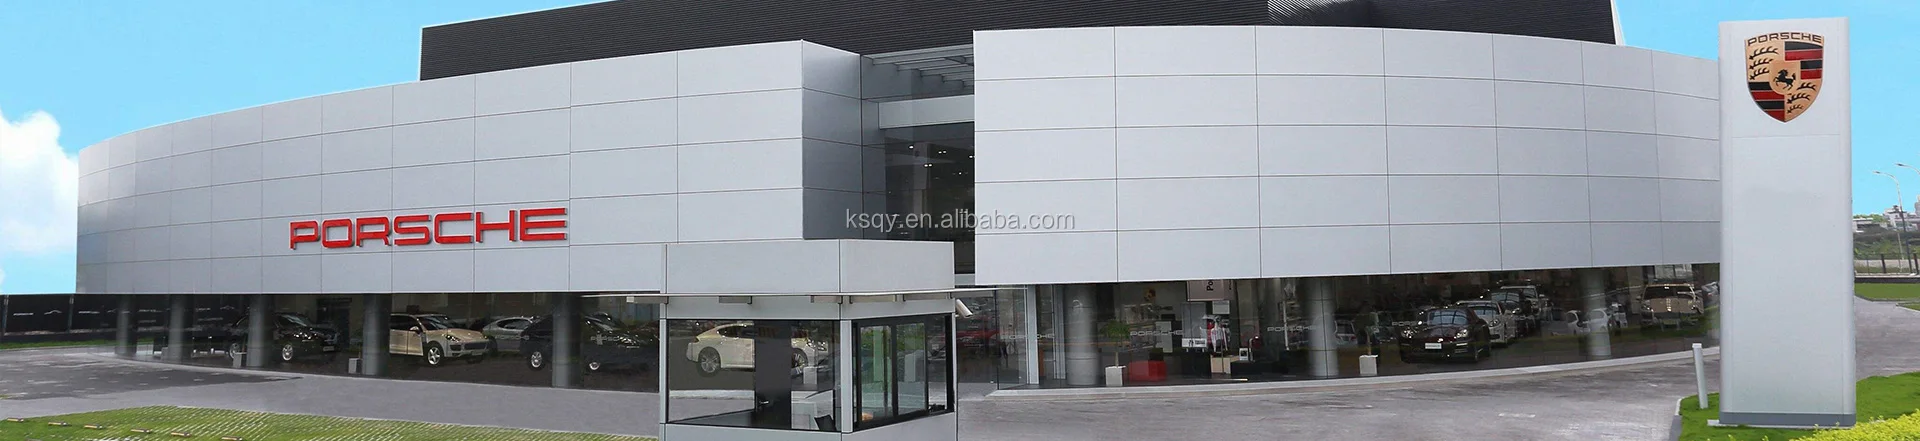 High quality decorative special shaped aluminum panel to facade panels for buildings